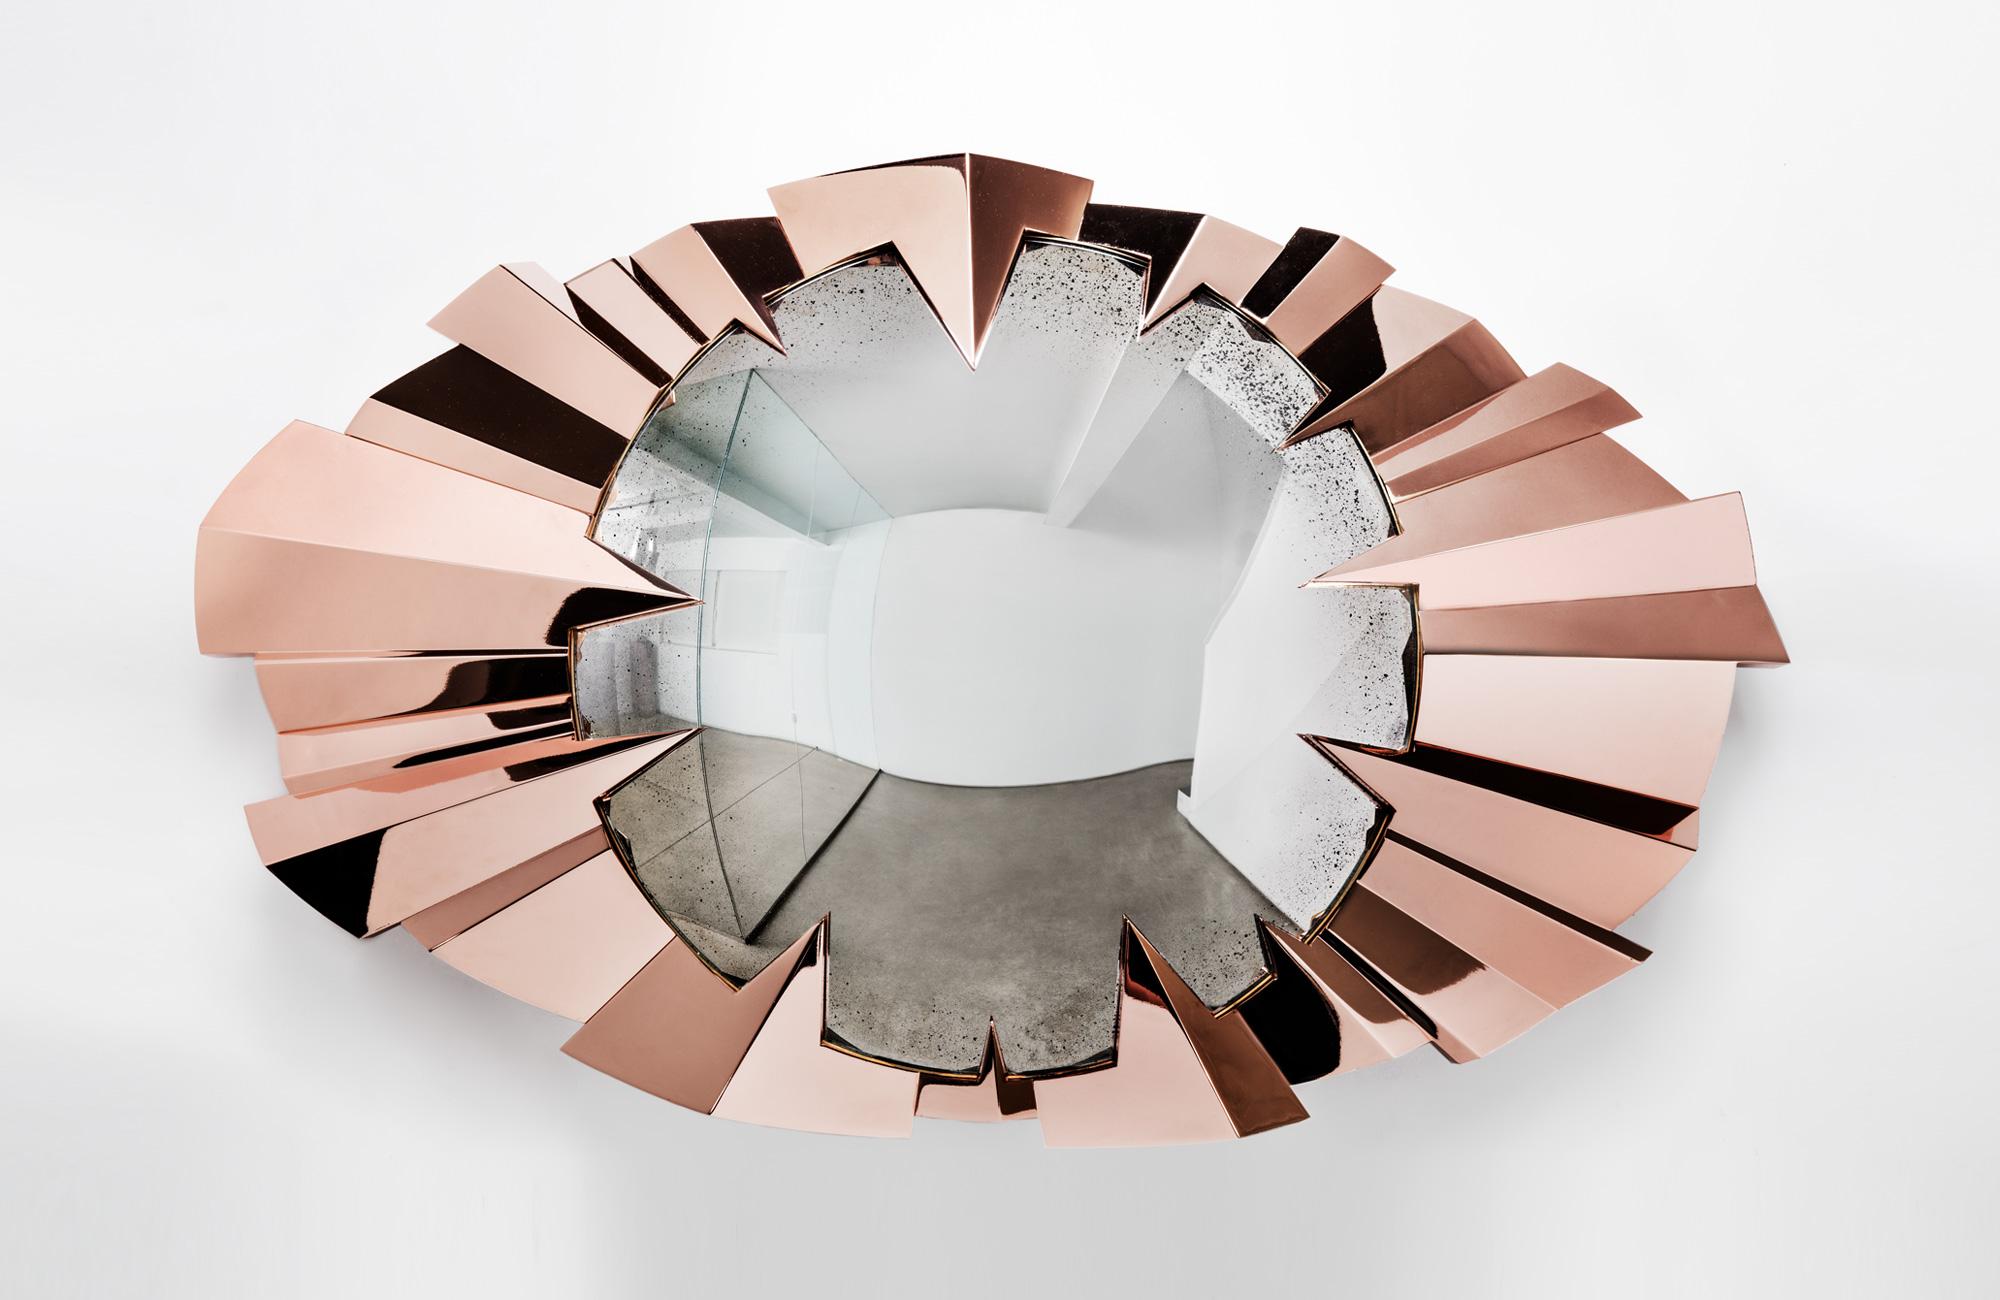 Aristas Mirror - Rose Gold, 2018
The Rose Gold Aristas Mirror has been hand-crafted using high finish 24 karat rose gold-plated metal. Produced by our highly skilled artisan craftsman this luxurious mirror is an exciting addition to any interior.